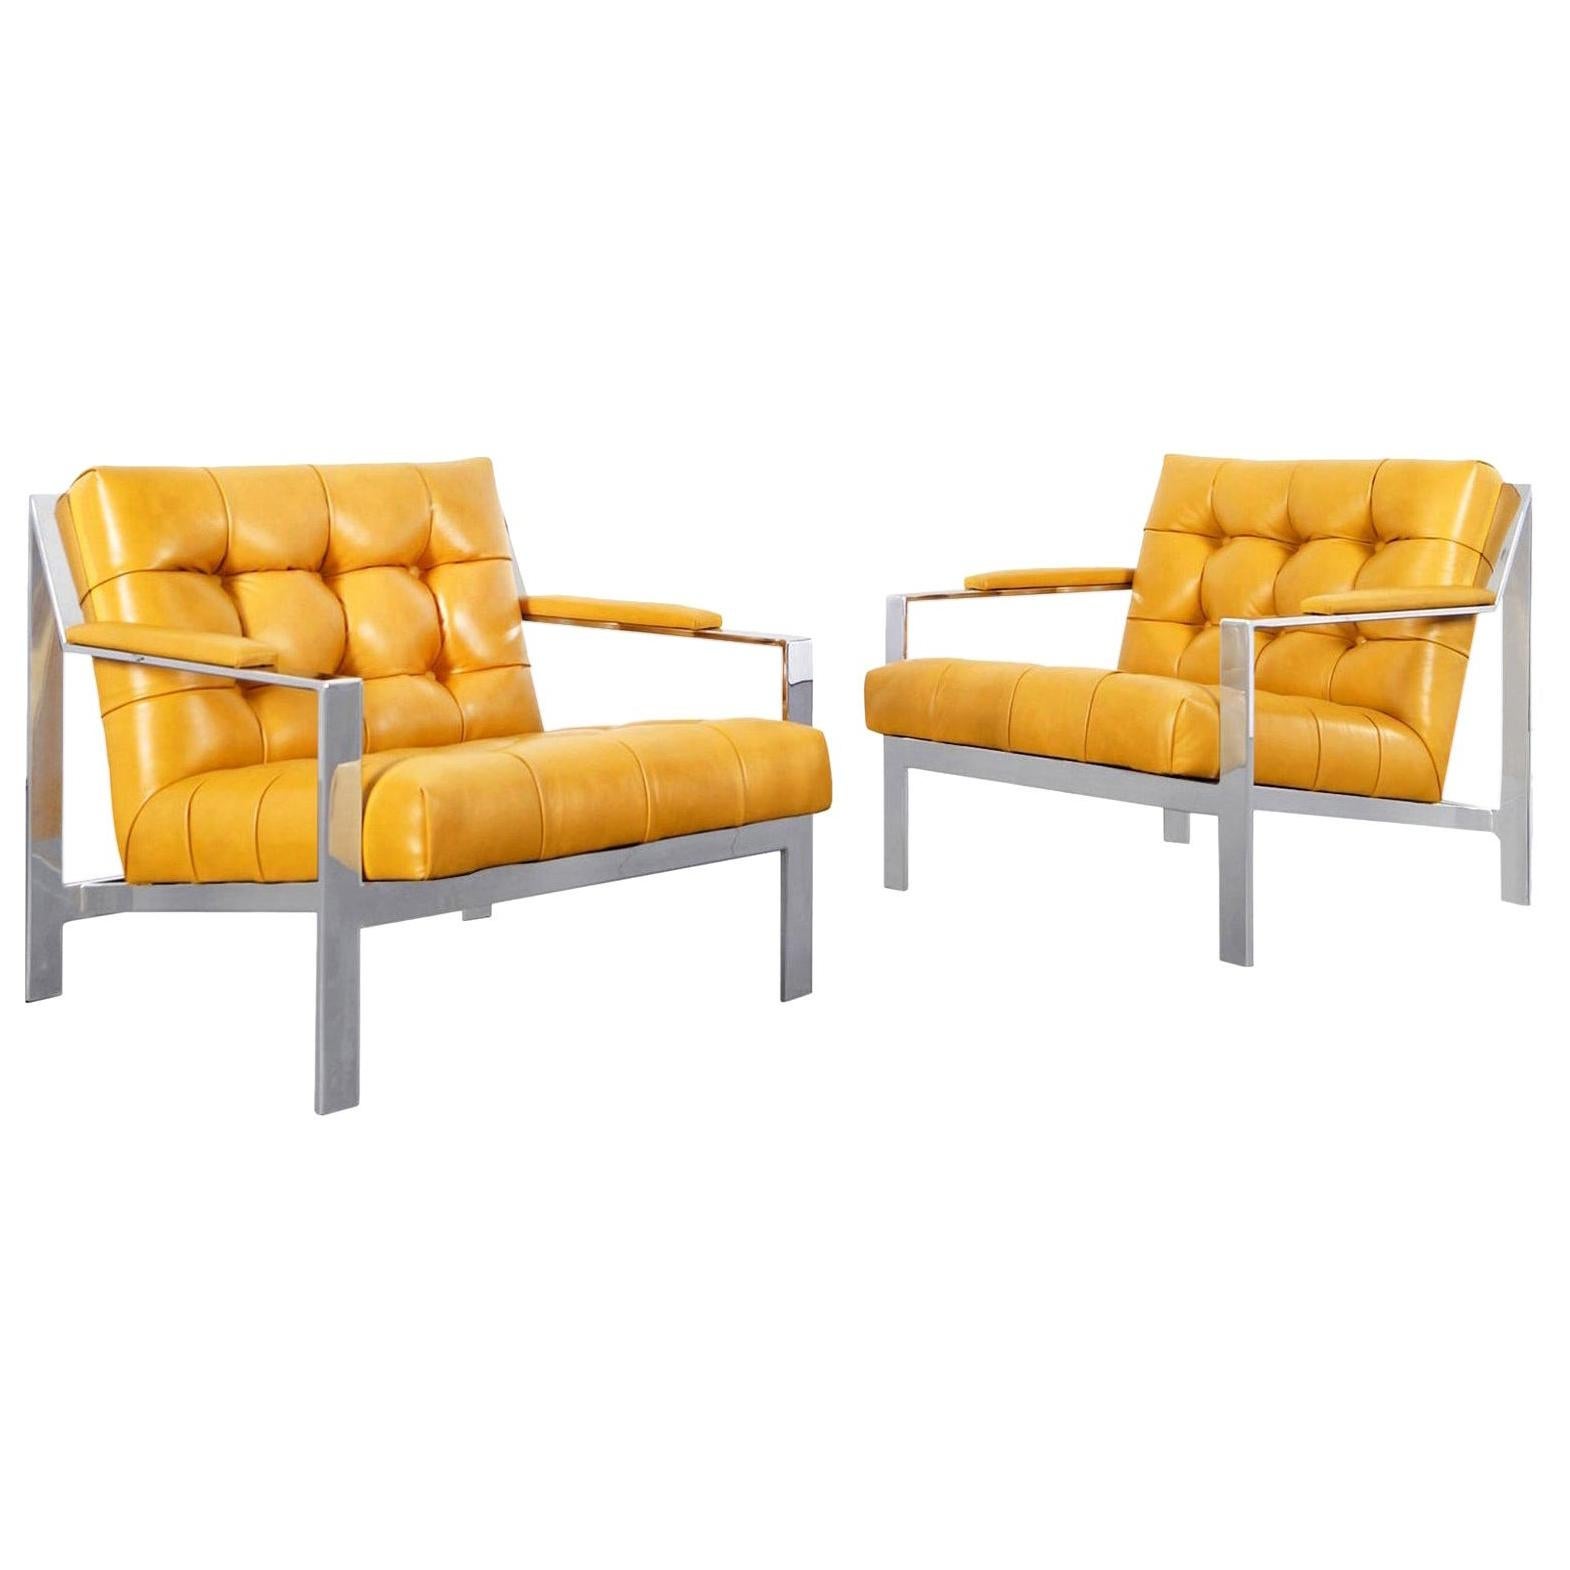 Vintage Chrome and Leather Biscuit Tufted Lounge Chairs by Cy Mann